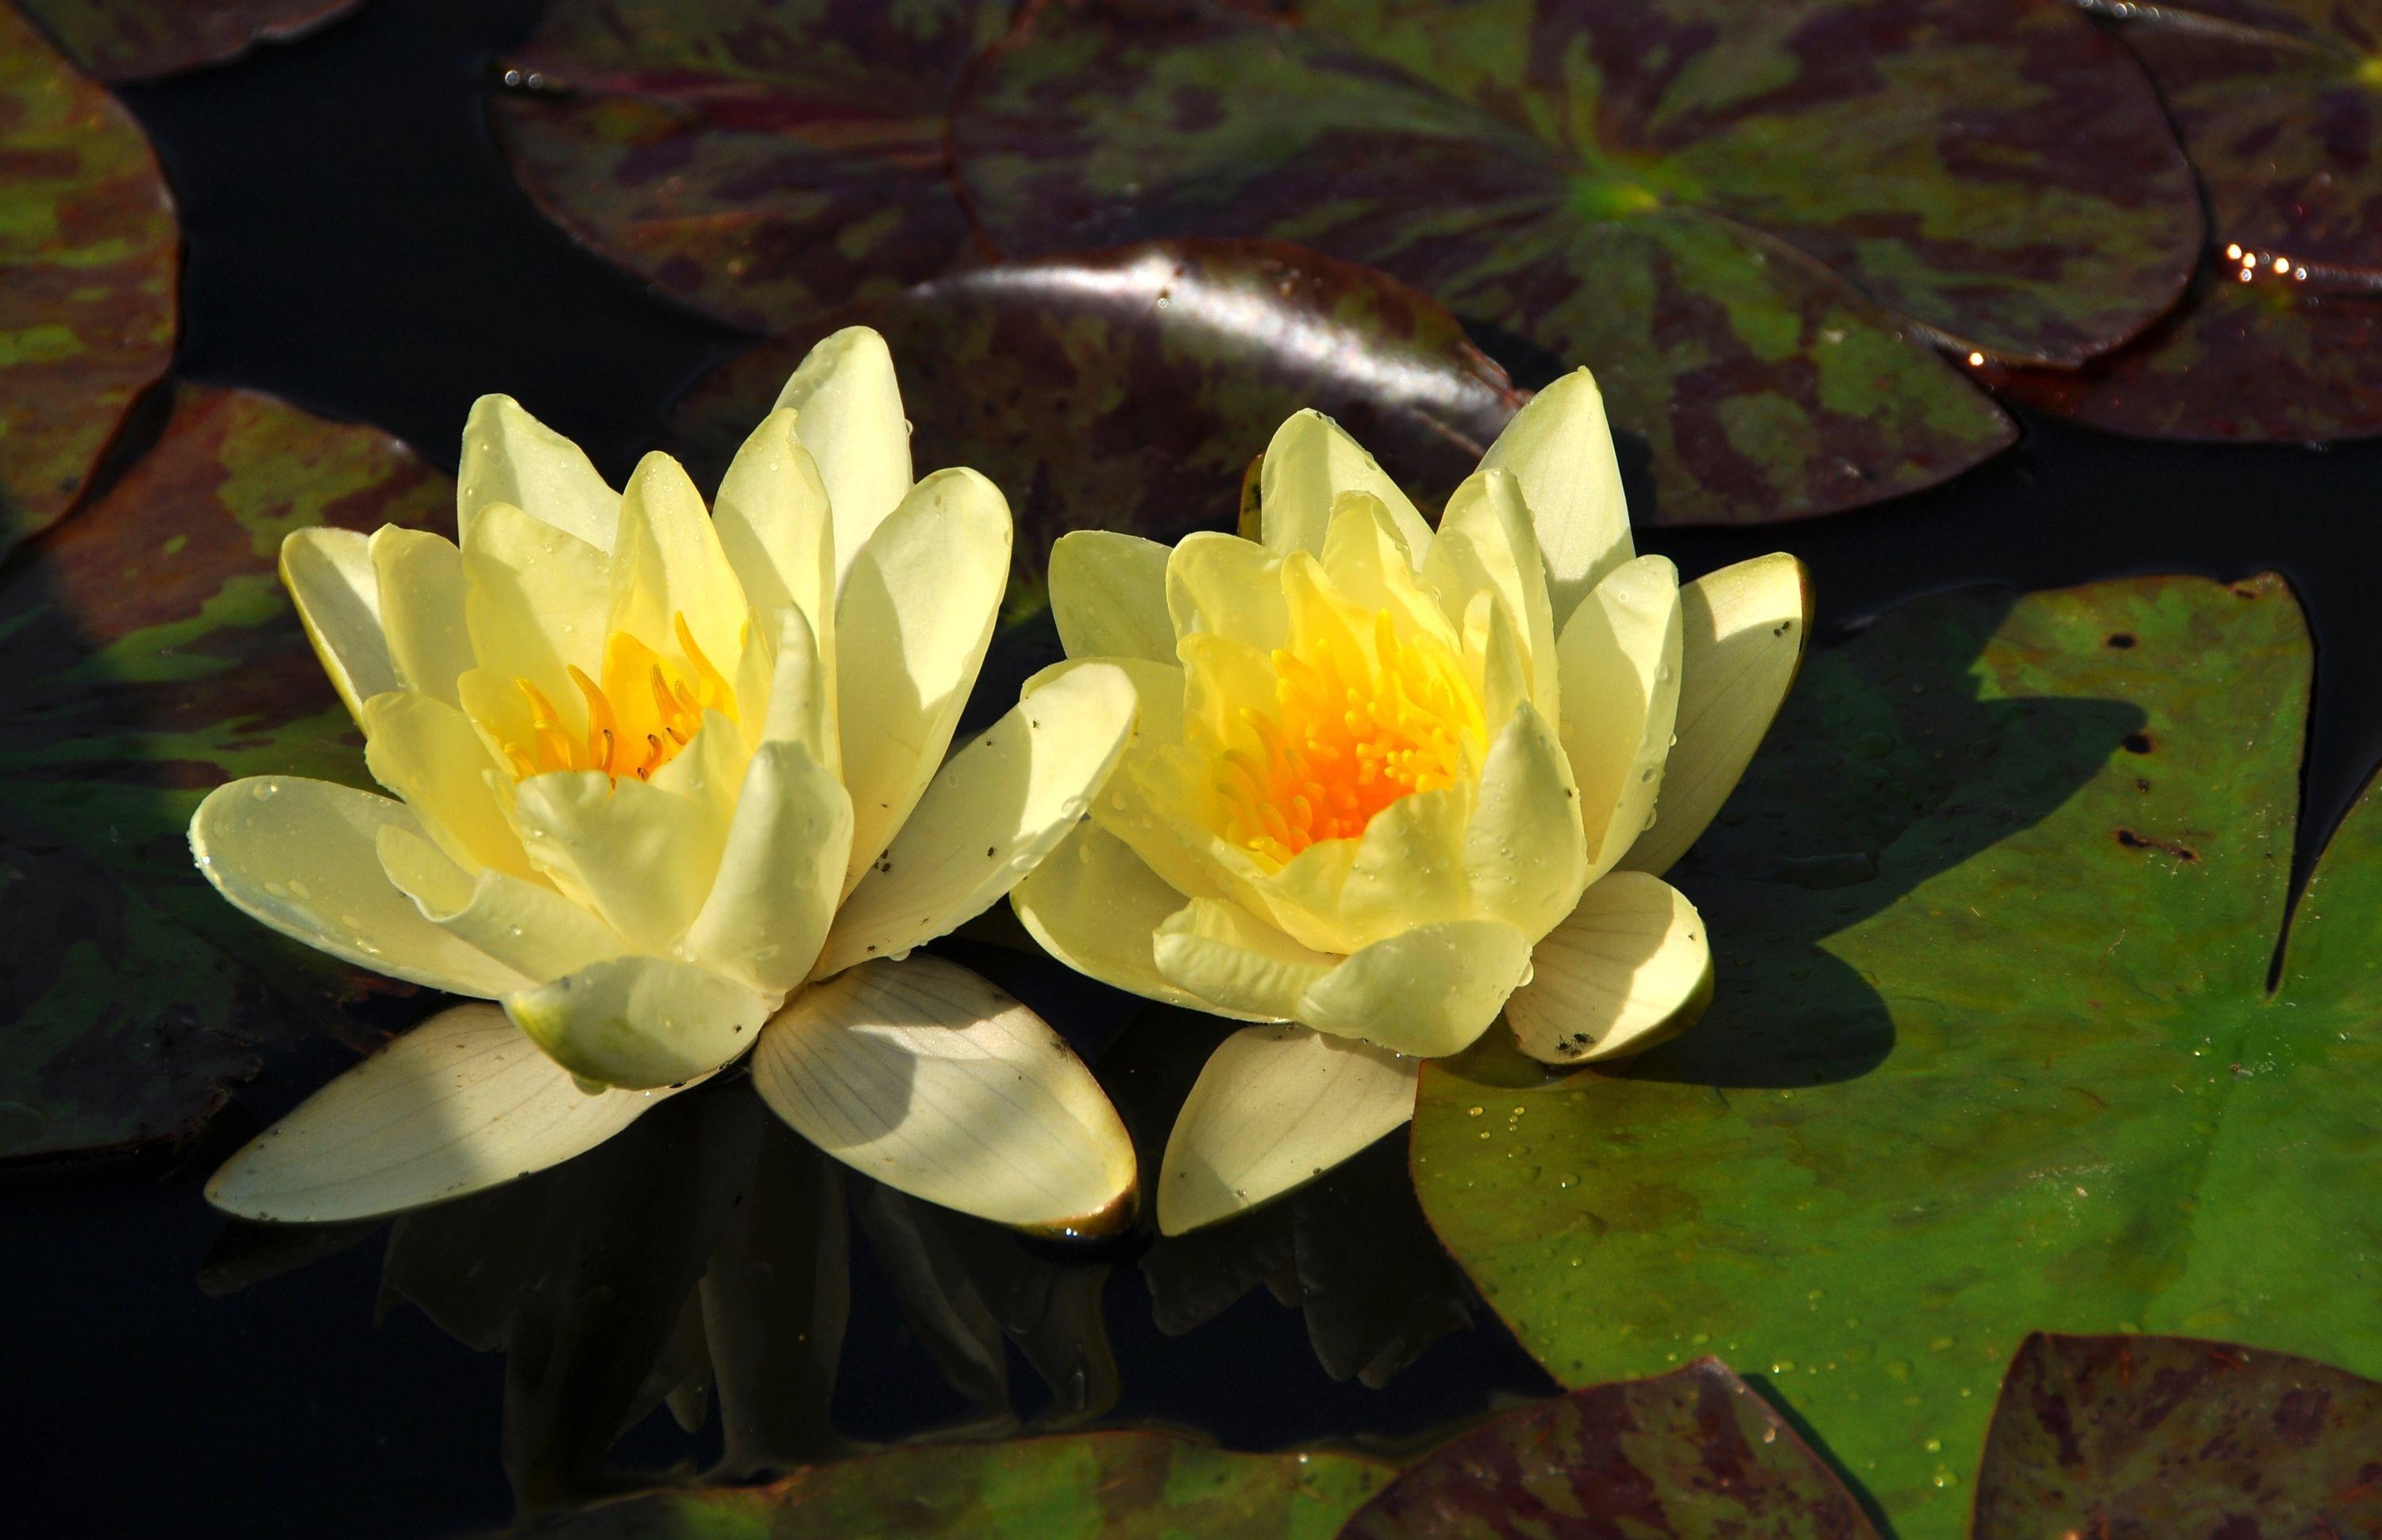 Free photo The water lily is yellow in color